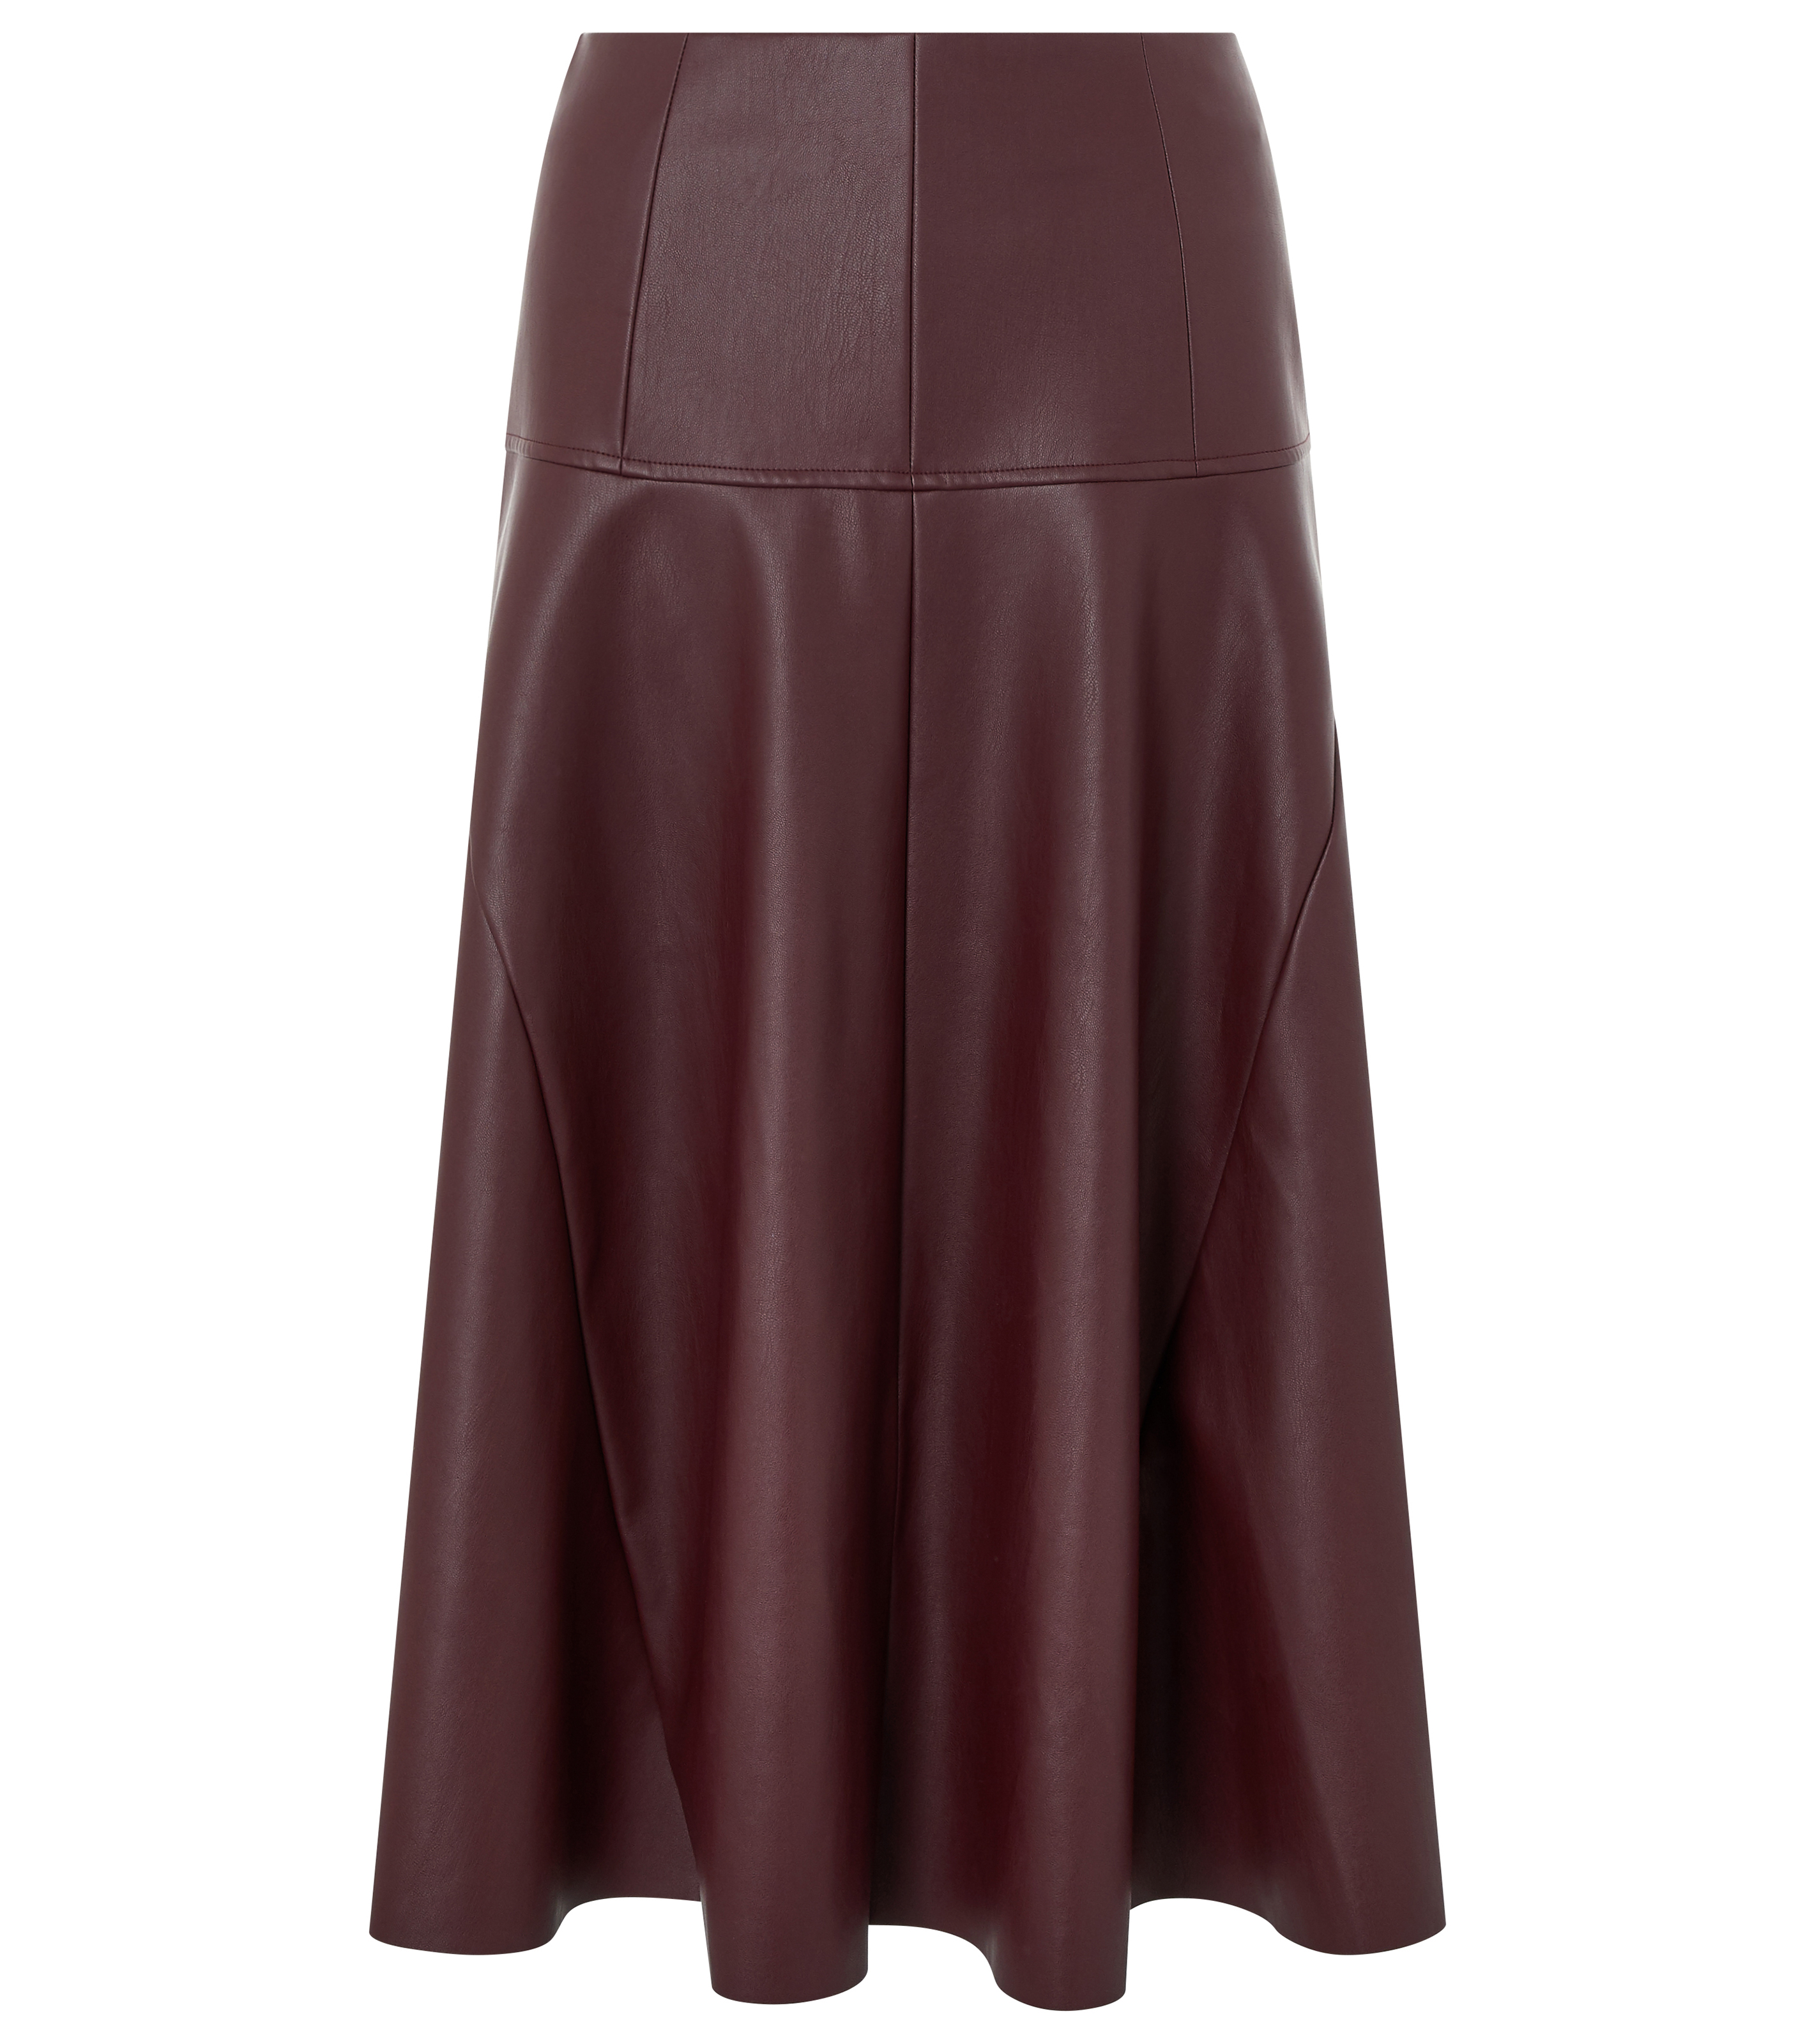 'Midaxi' skirts are big news for autumn - here's how to style this ...